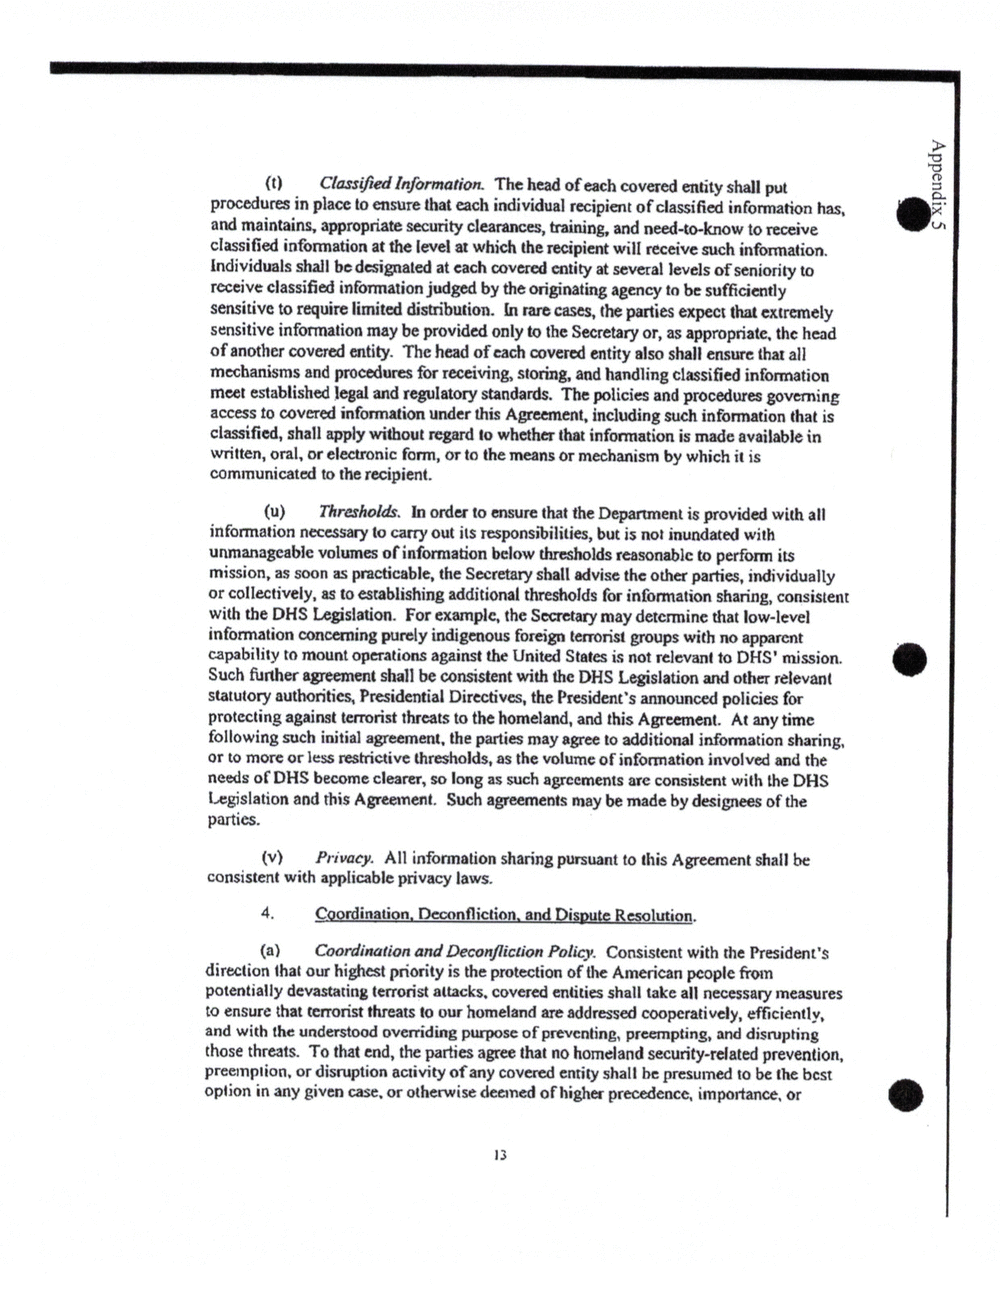 Page 118 from March 2013 Watchlisting Guidance